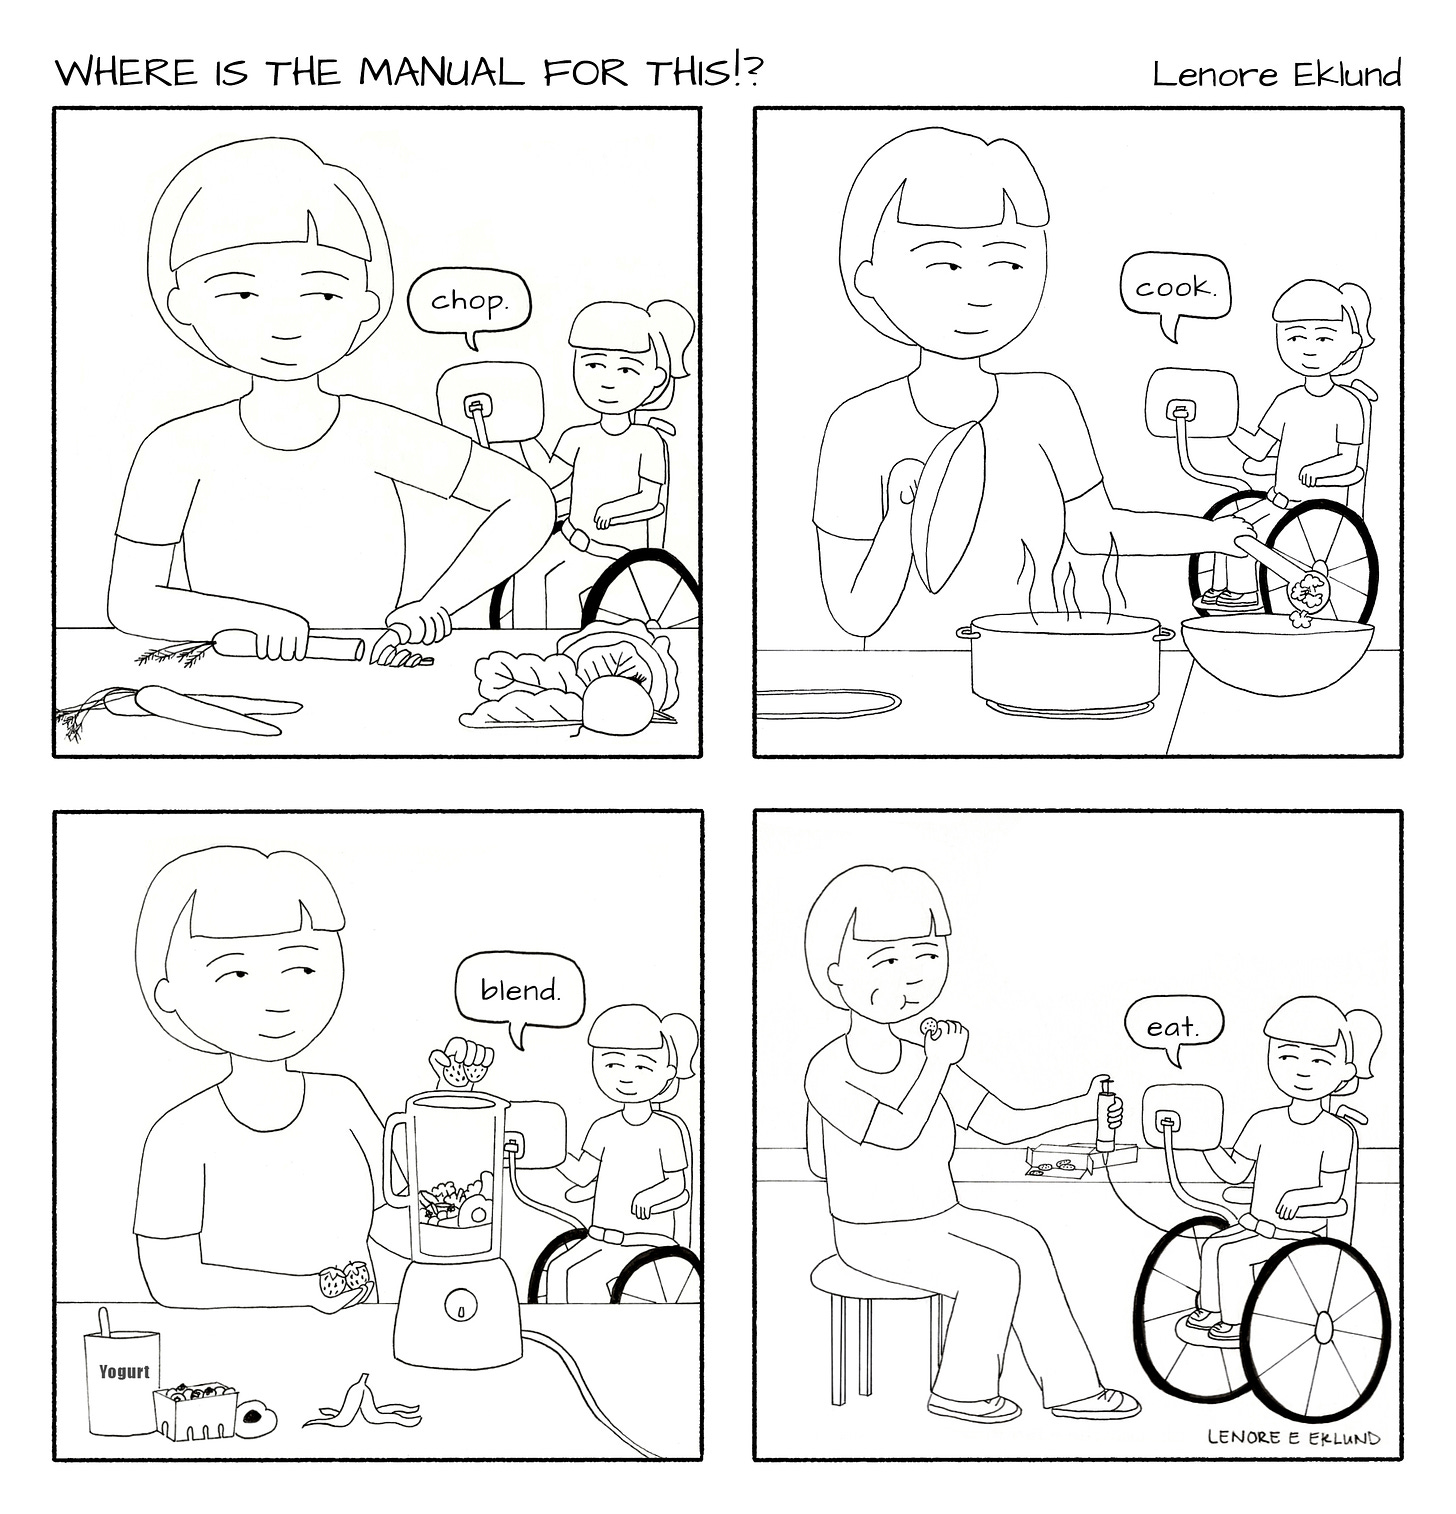 A four-panel line drawing cartoon titled Where is the Manual for This?!. The first panel shows a mother cutting vegetables at a counter in the foreground while a girl in a wheelchair in the background says “chop” with her computerized talker. In the second panel, the mom scoops food from a hot pot while looking back at her daughter who says “Cook” with her talker. In the third panel, the mom adds strawberries to a blender and the daughter says “blend.” In the fourth panel, the mom is sitting at a table, eating with one hand and pushing food through her daughter’s feeding tube with the other. “Eat,” her daughter says. 